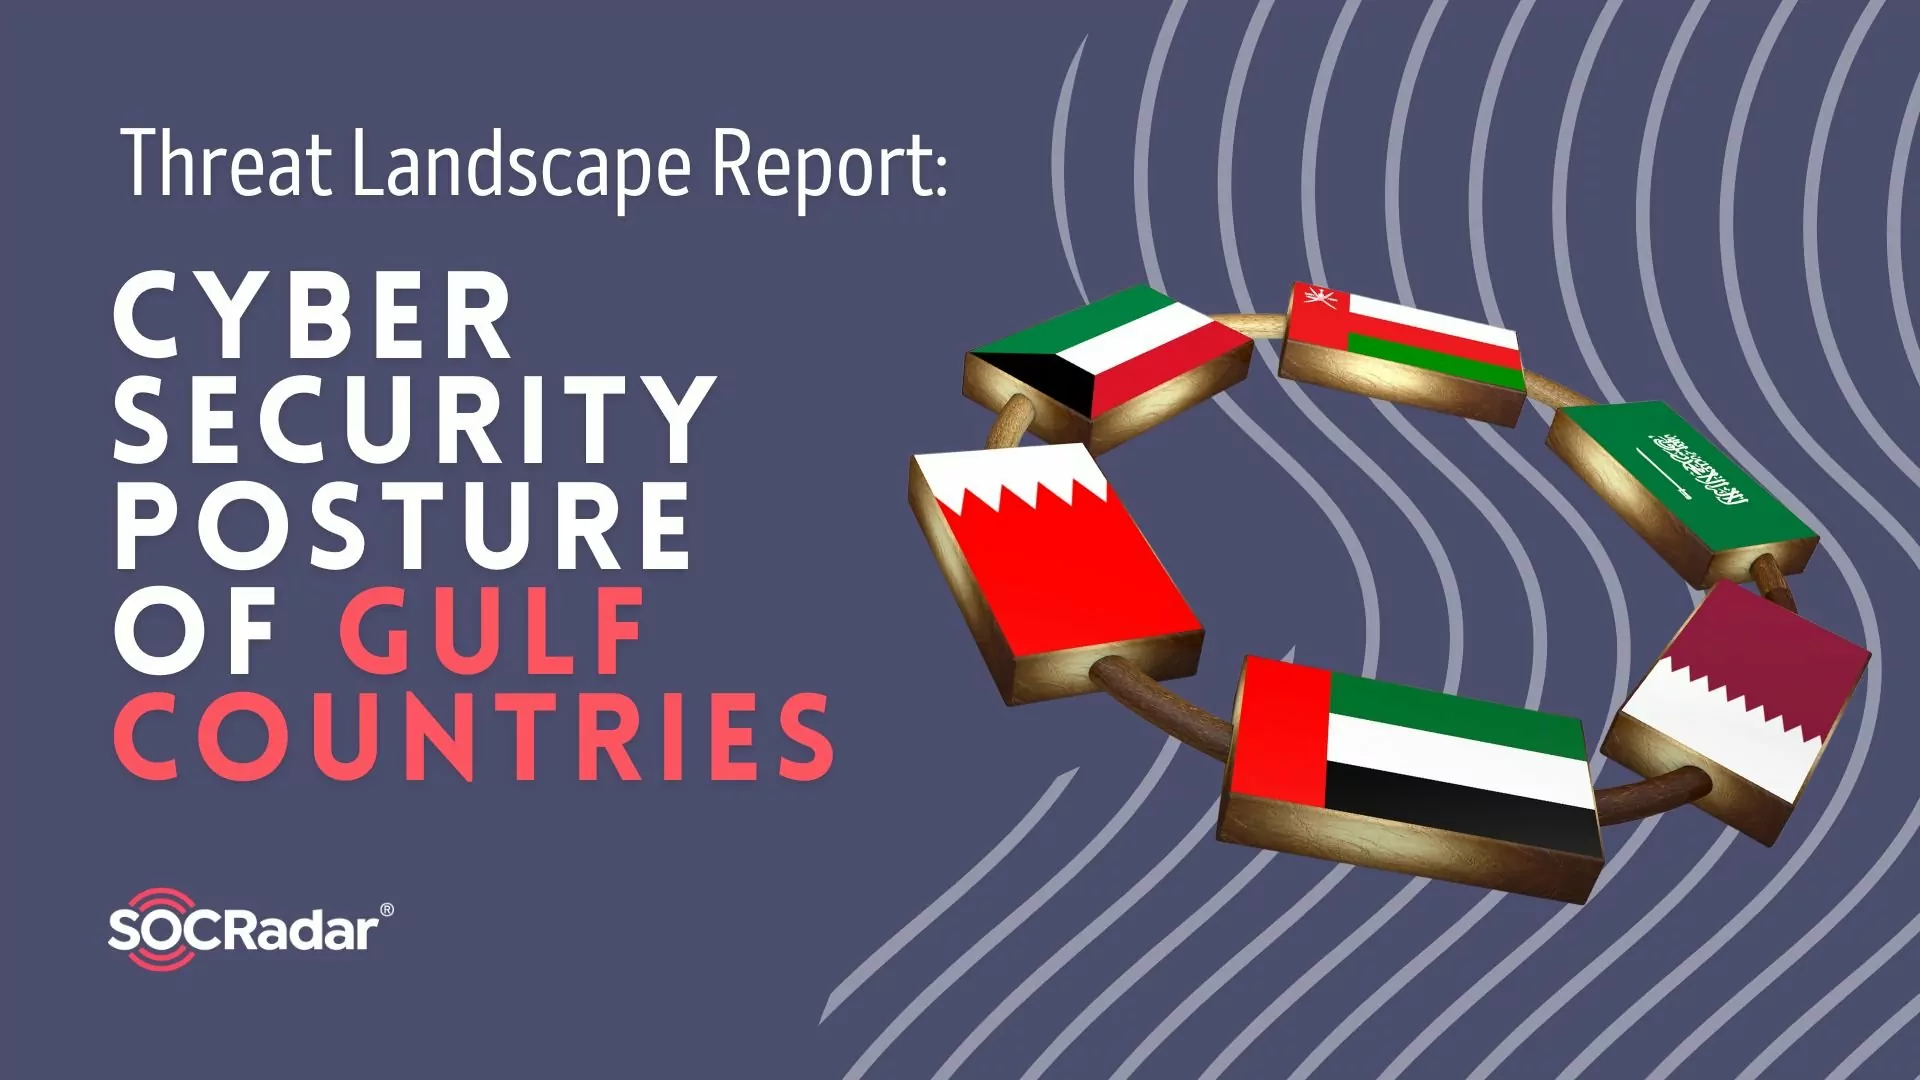 SOCRadar® Cyber Intelligence Inc. | Gulf Countries Threat Landscape Report: Cyber Security Posture of the GCC Countries